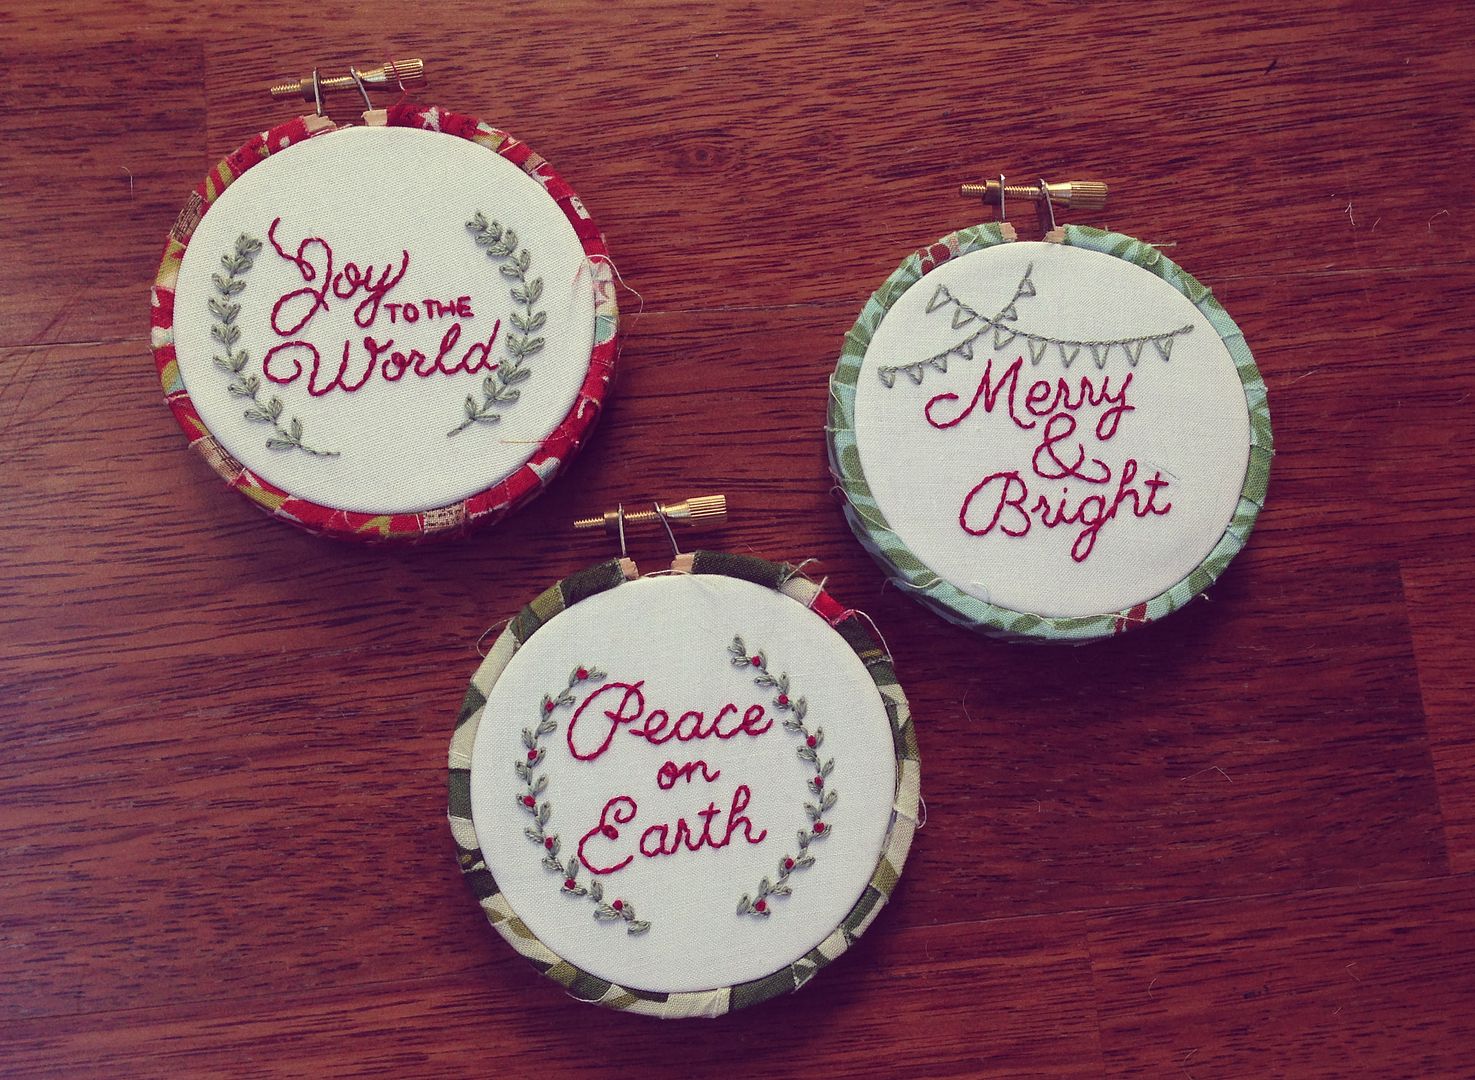 Ten Feet Off Beale Christmas Embroidery Hoop Ornaments // http://www.etsy.com/shop/tenfeetoffbeale